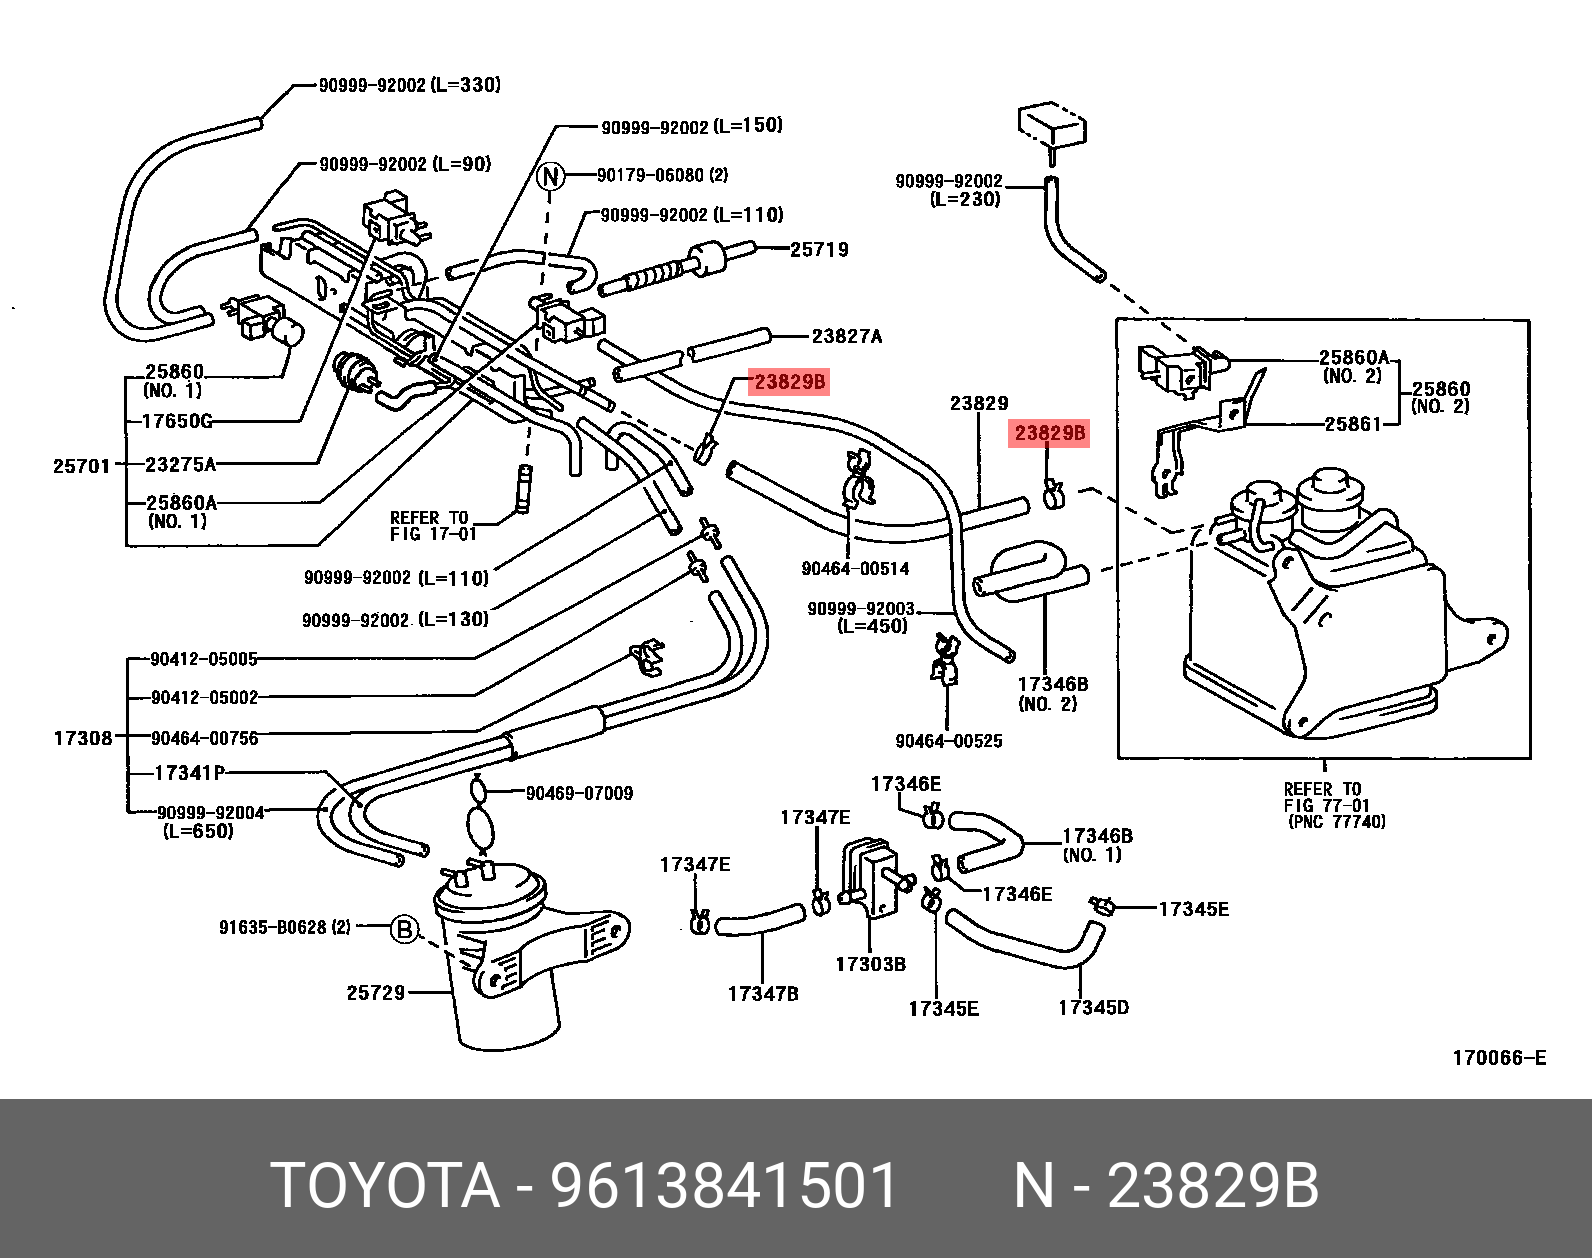 CAMRY 201706-, CLAMP OR CLIP(FOR WATER BY-PASS HOSE NO.6)